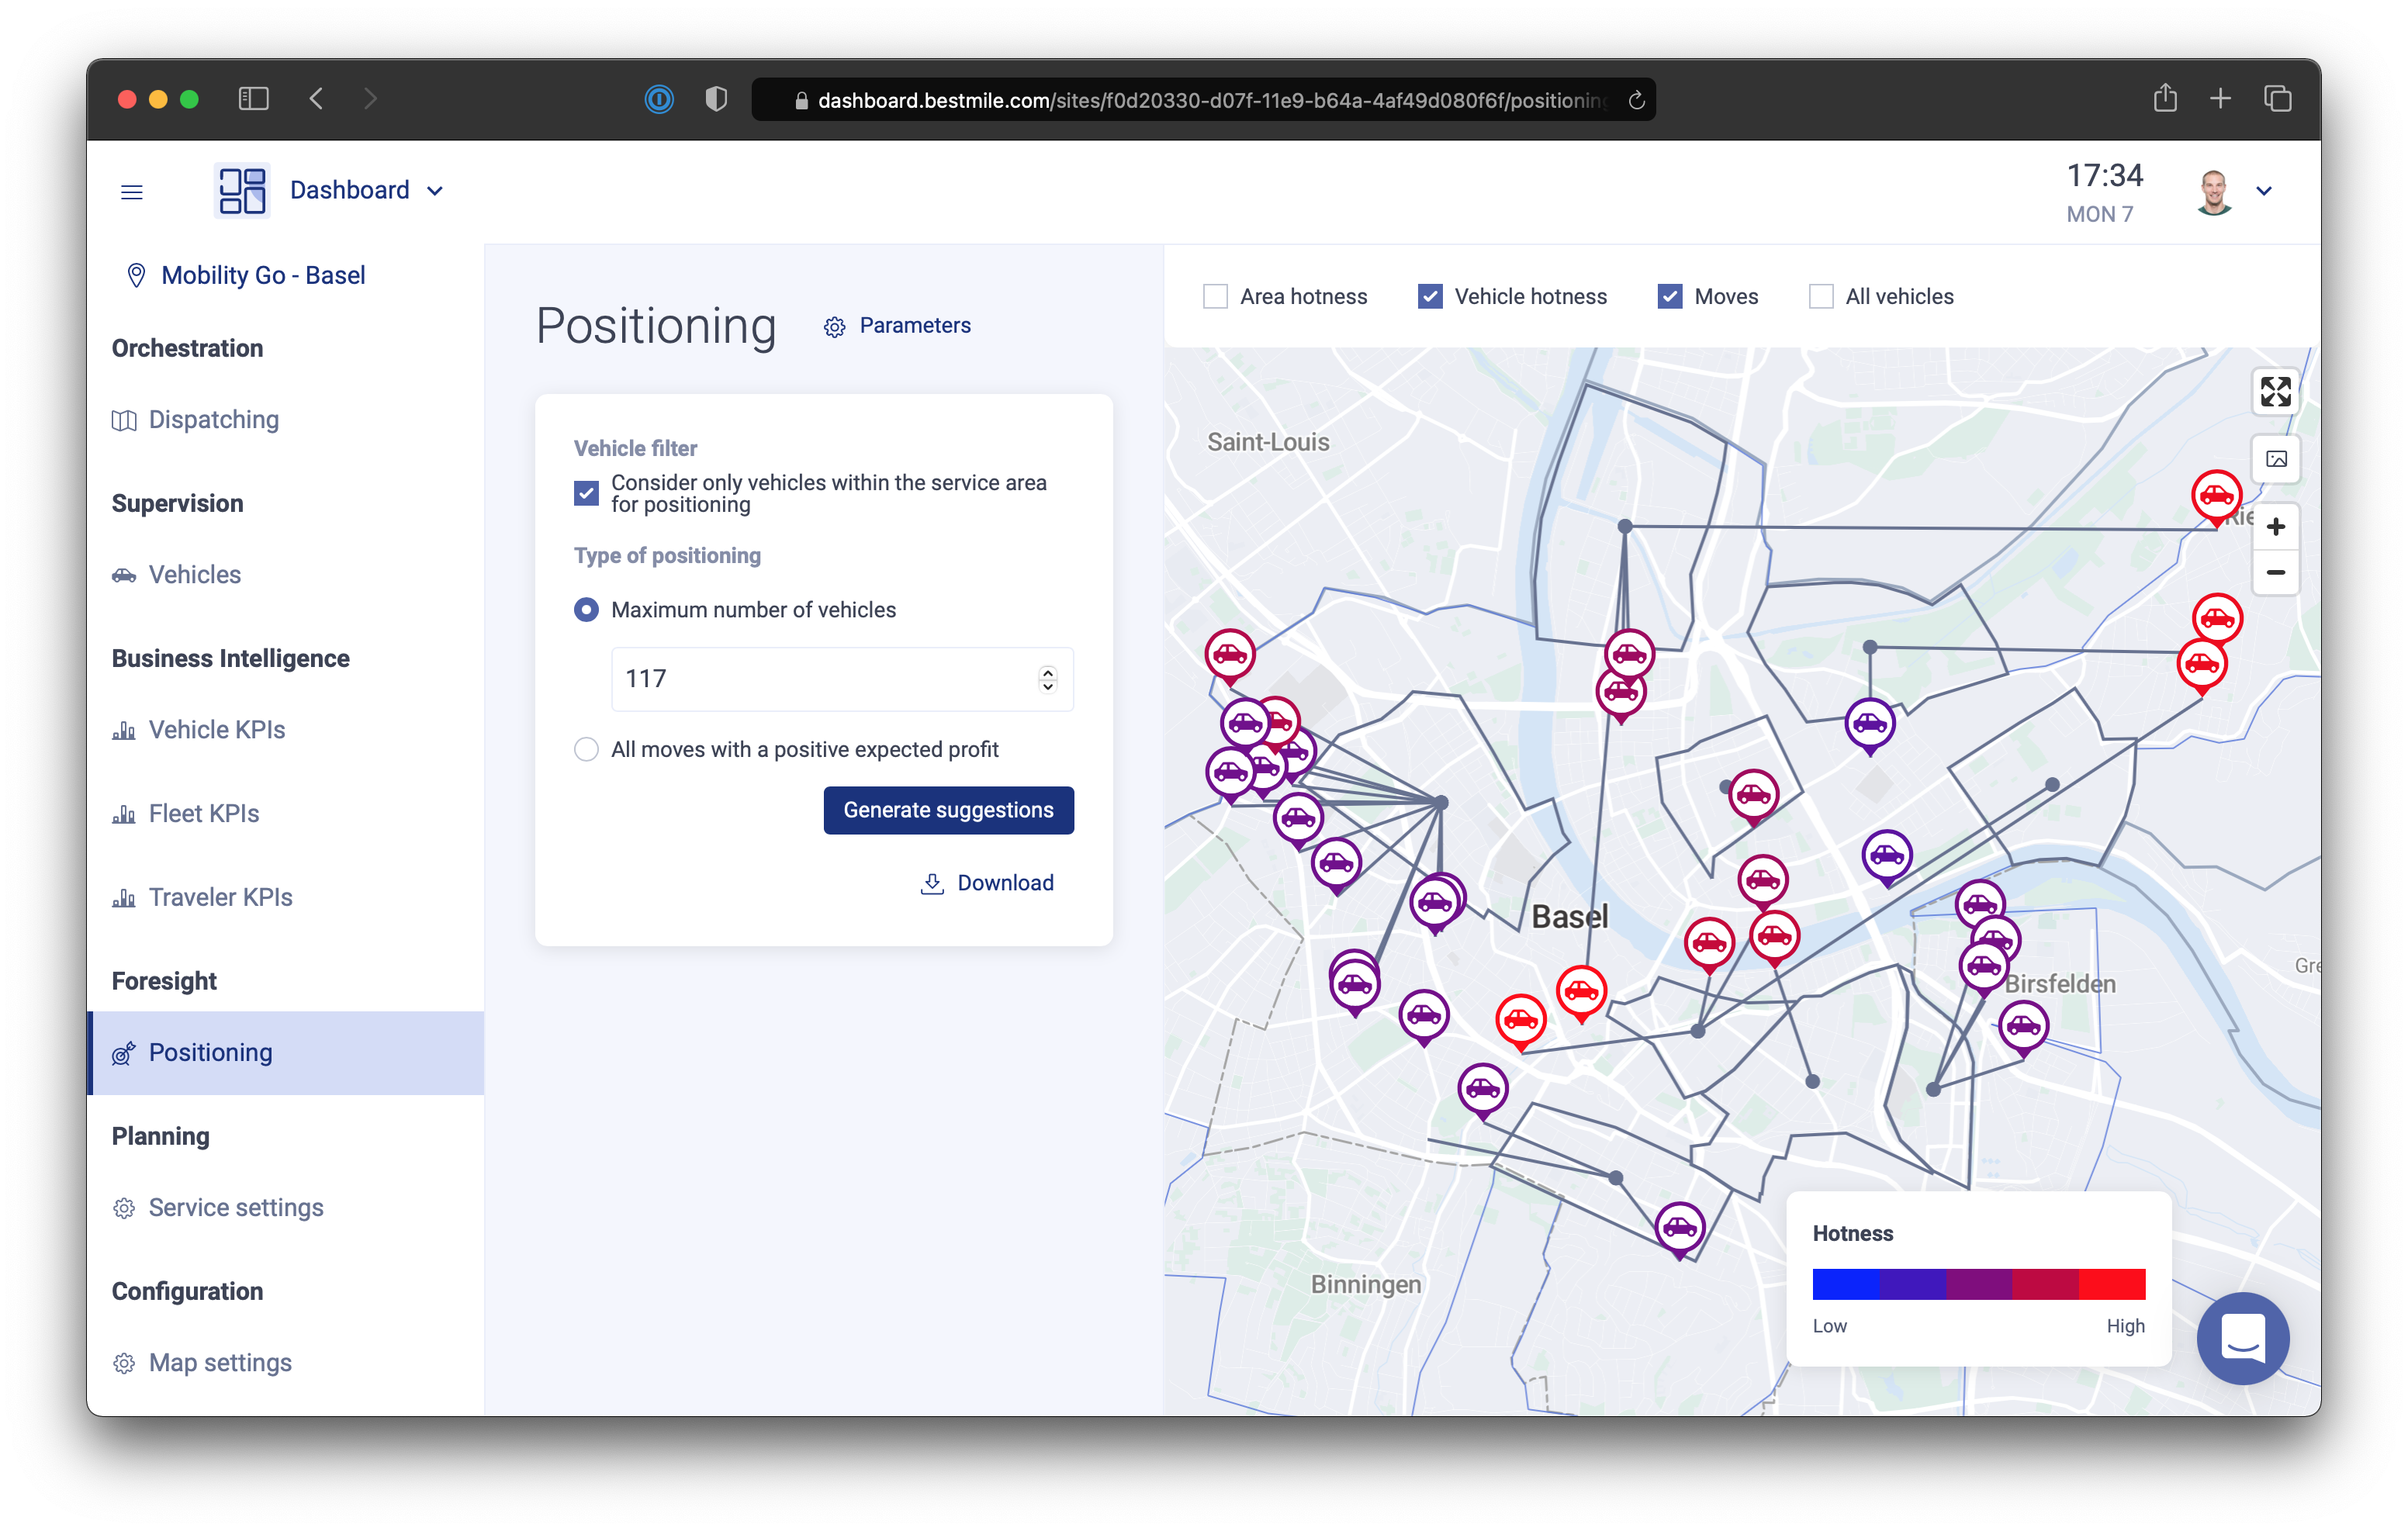 The positioning feature allows to see which cars are used more frequently and from which area. It is currently used to pre-position cars, and could allow for dynamic pricing in the future